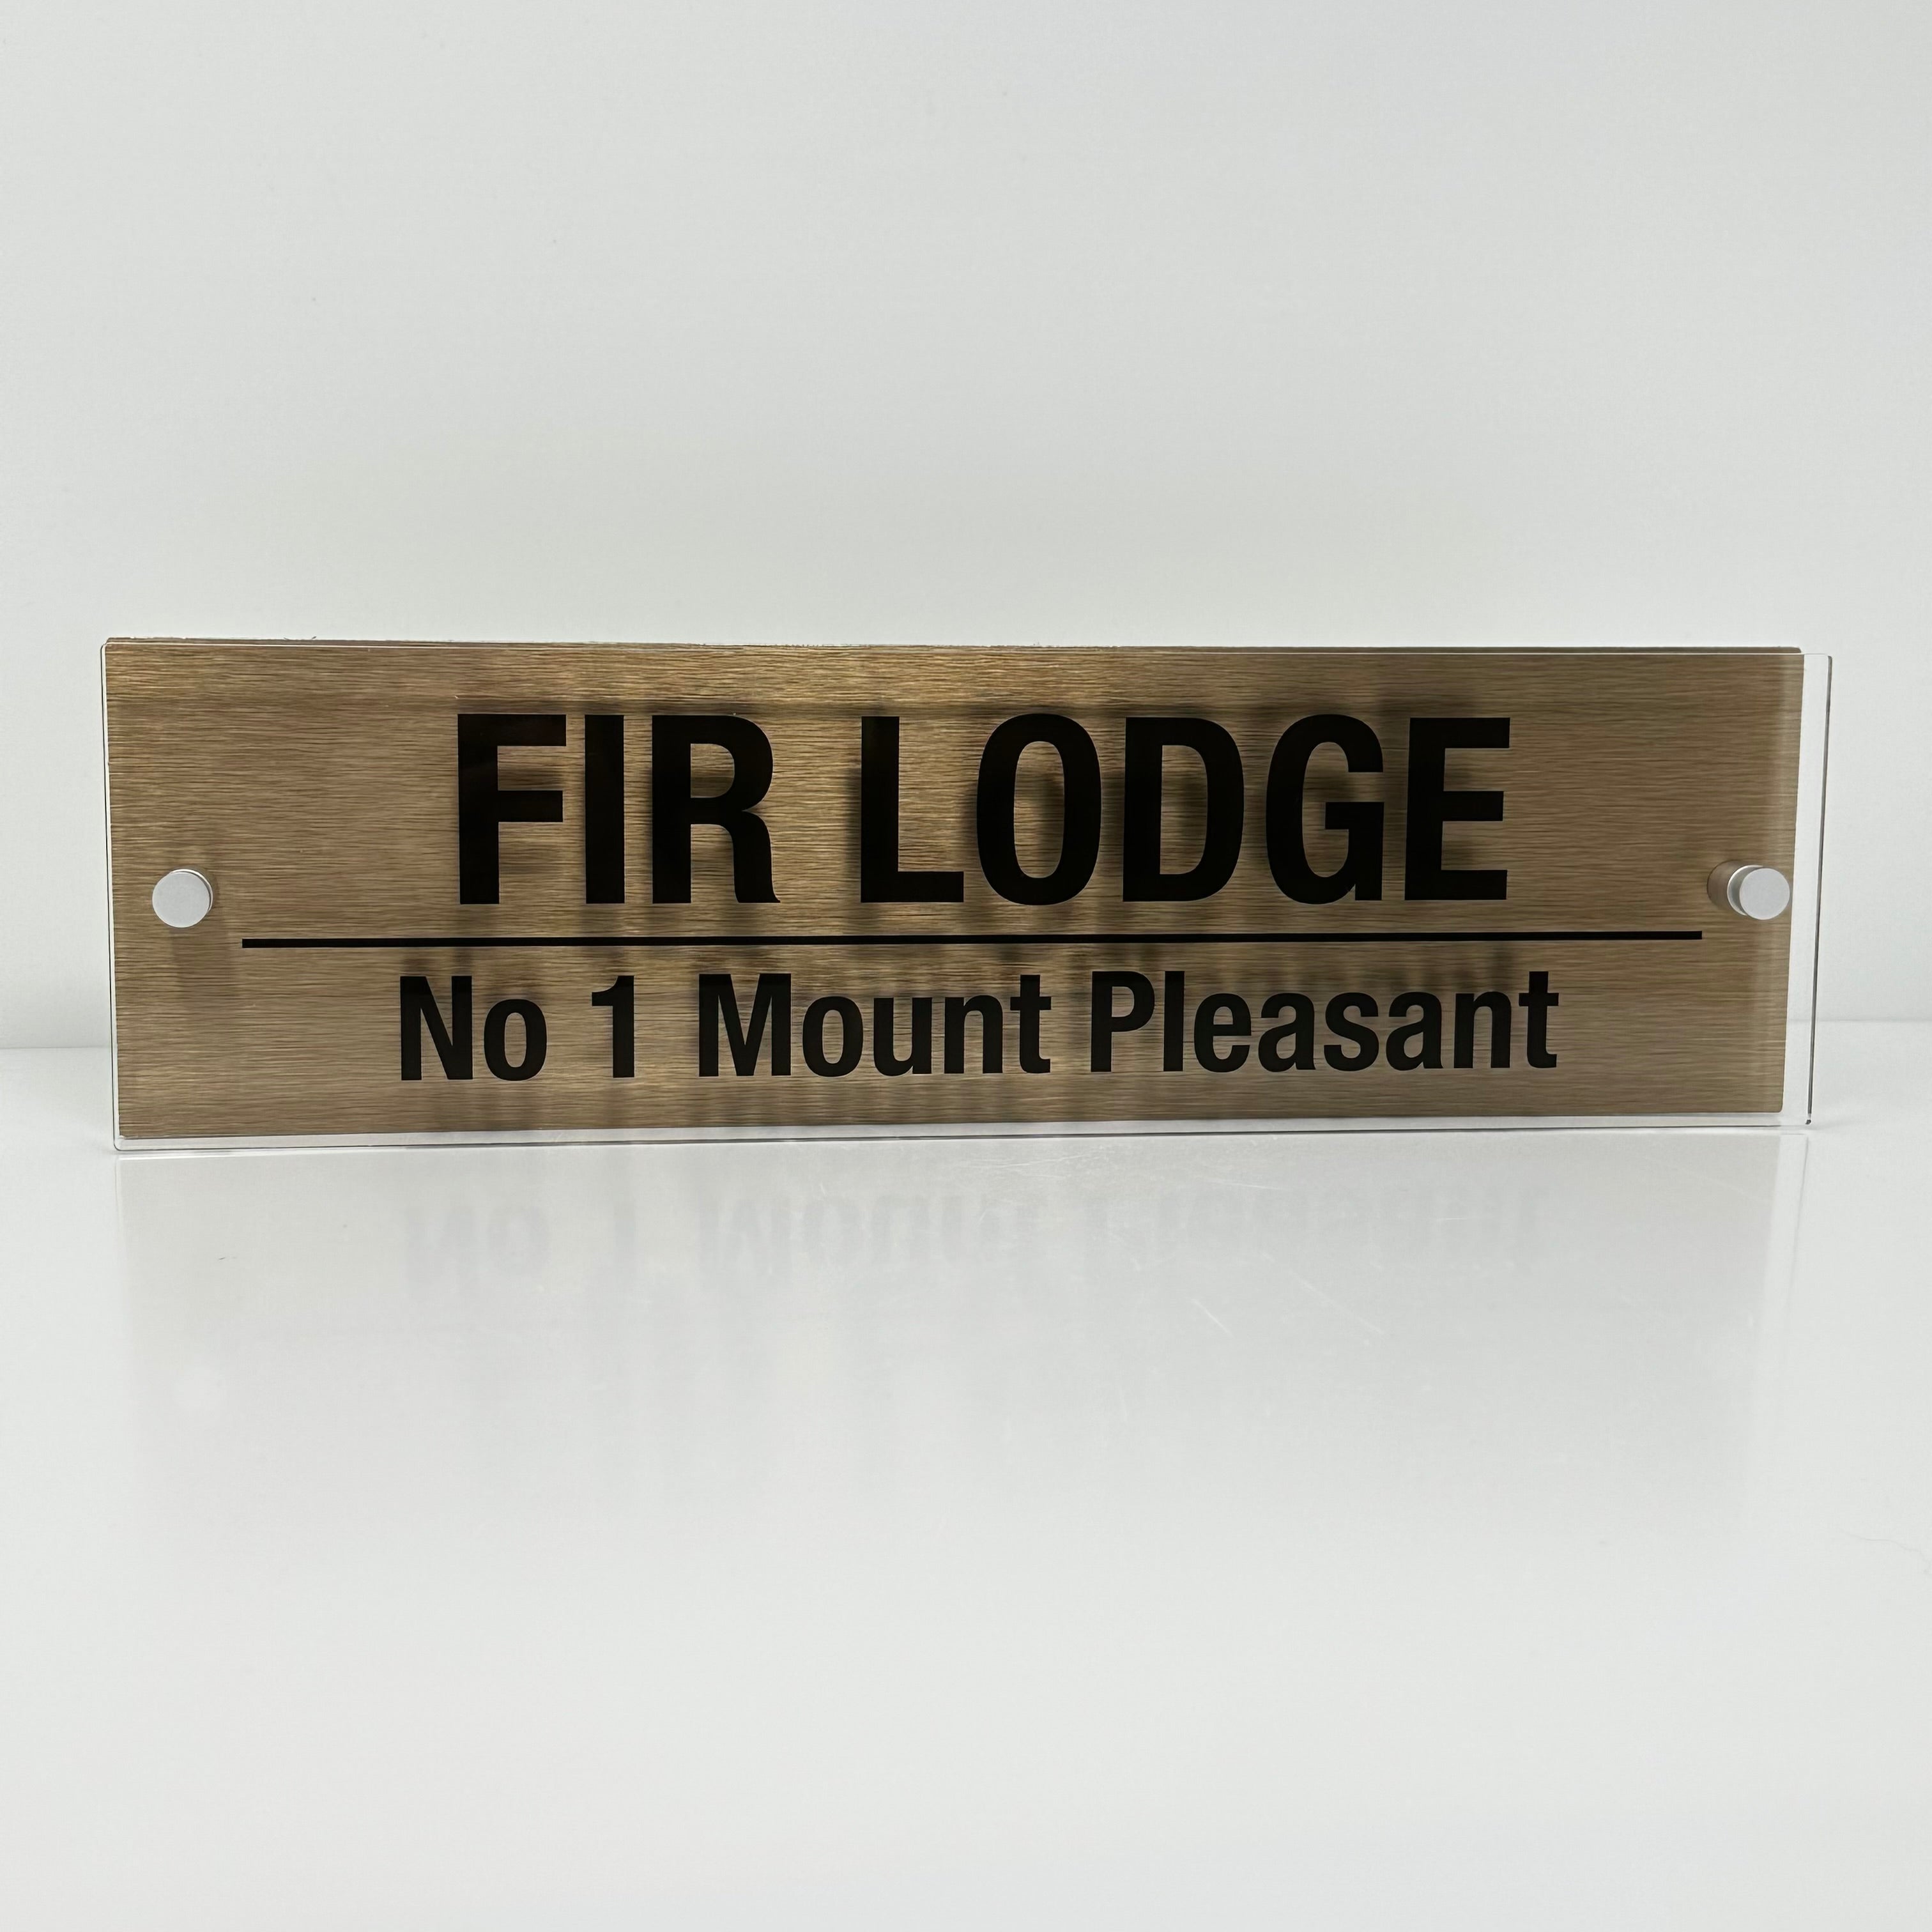 The Fir Lodge Modern House Sign with Perspex Acrylic Front, Brass Rear Panel and Satin Silver Stand Off Fixings ( Size - 42cm x 12cm )